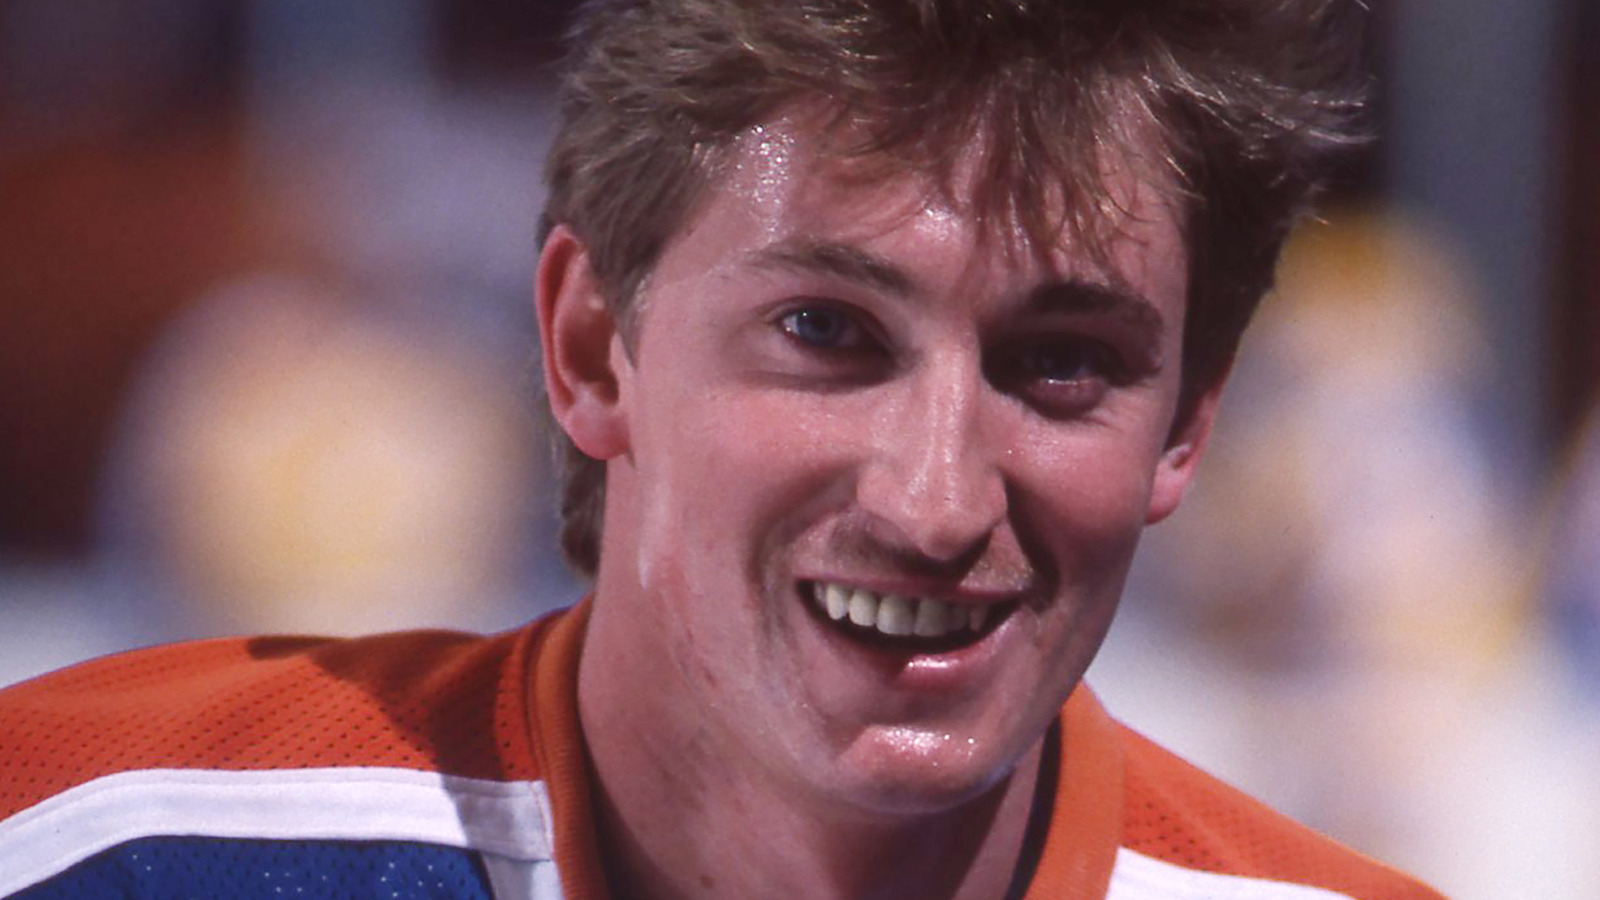 TSN - Gretzky is one of just four people with his name on the